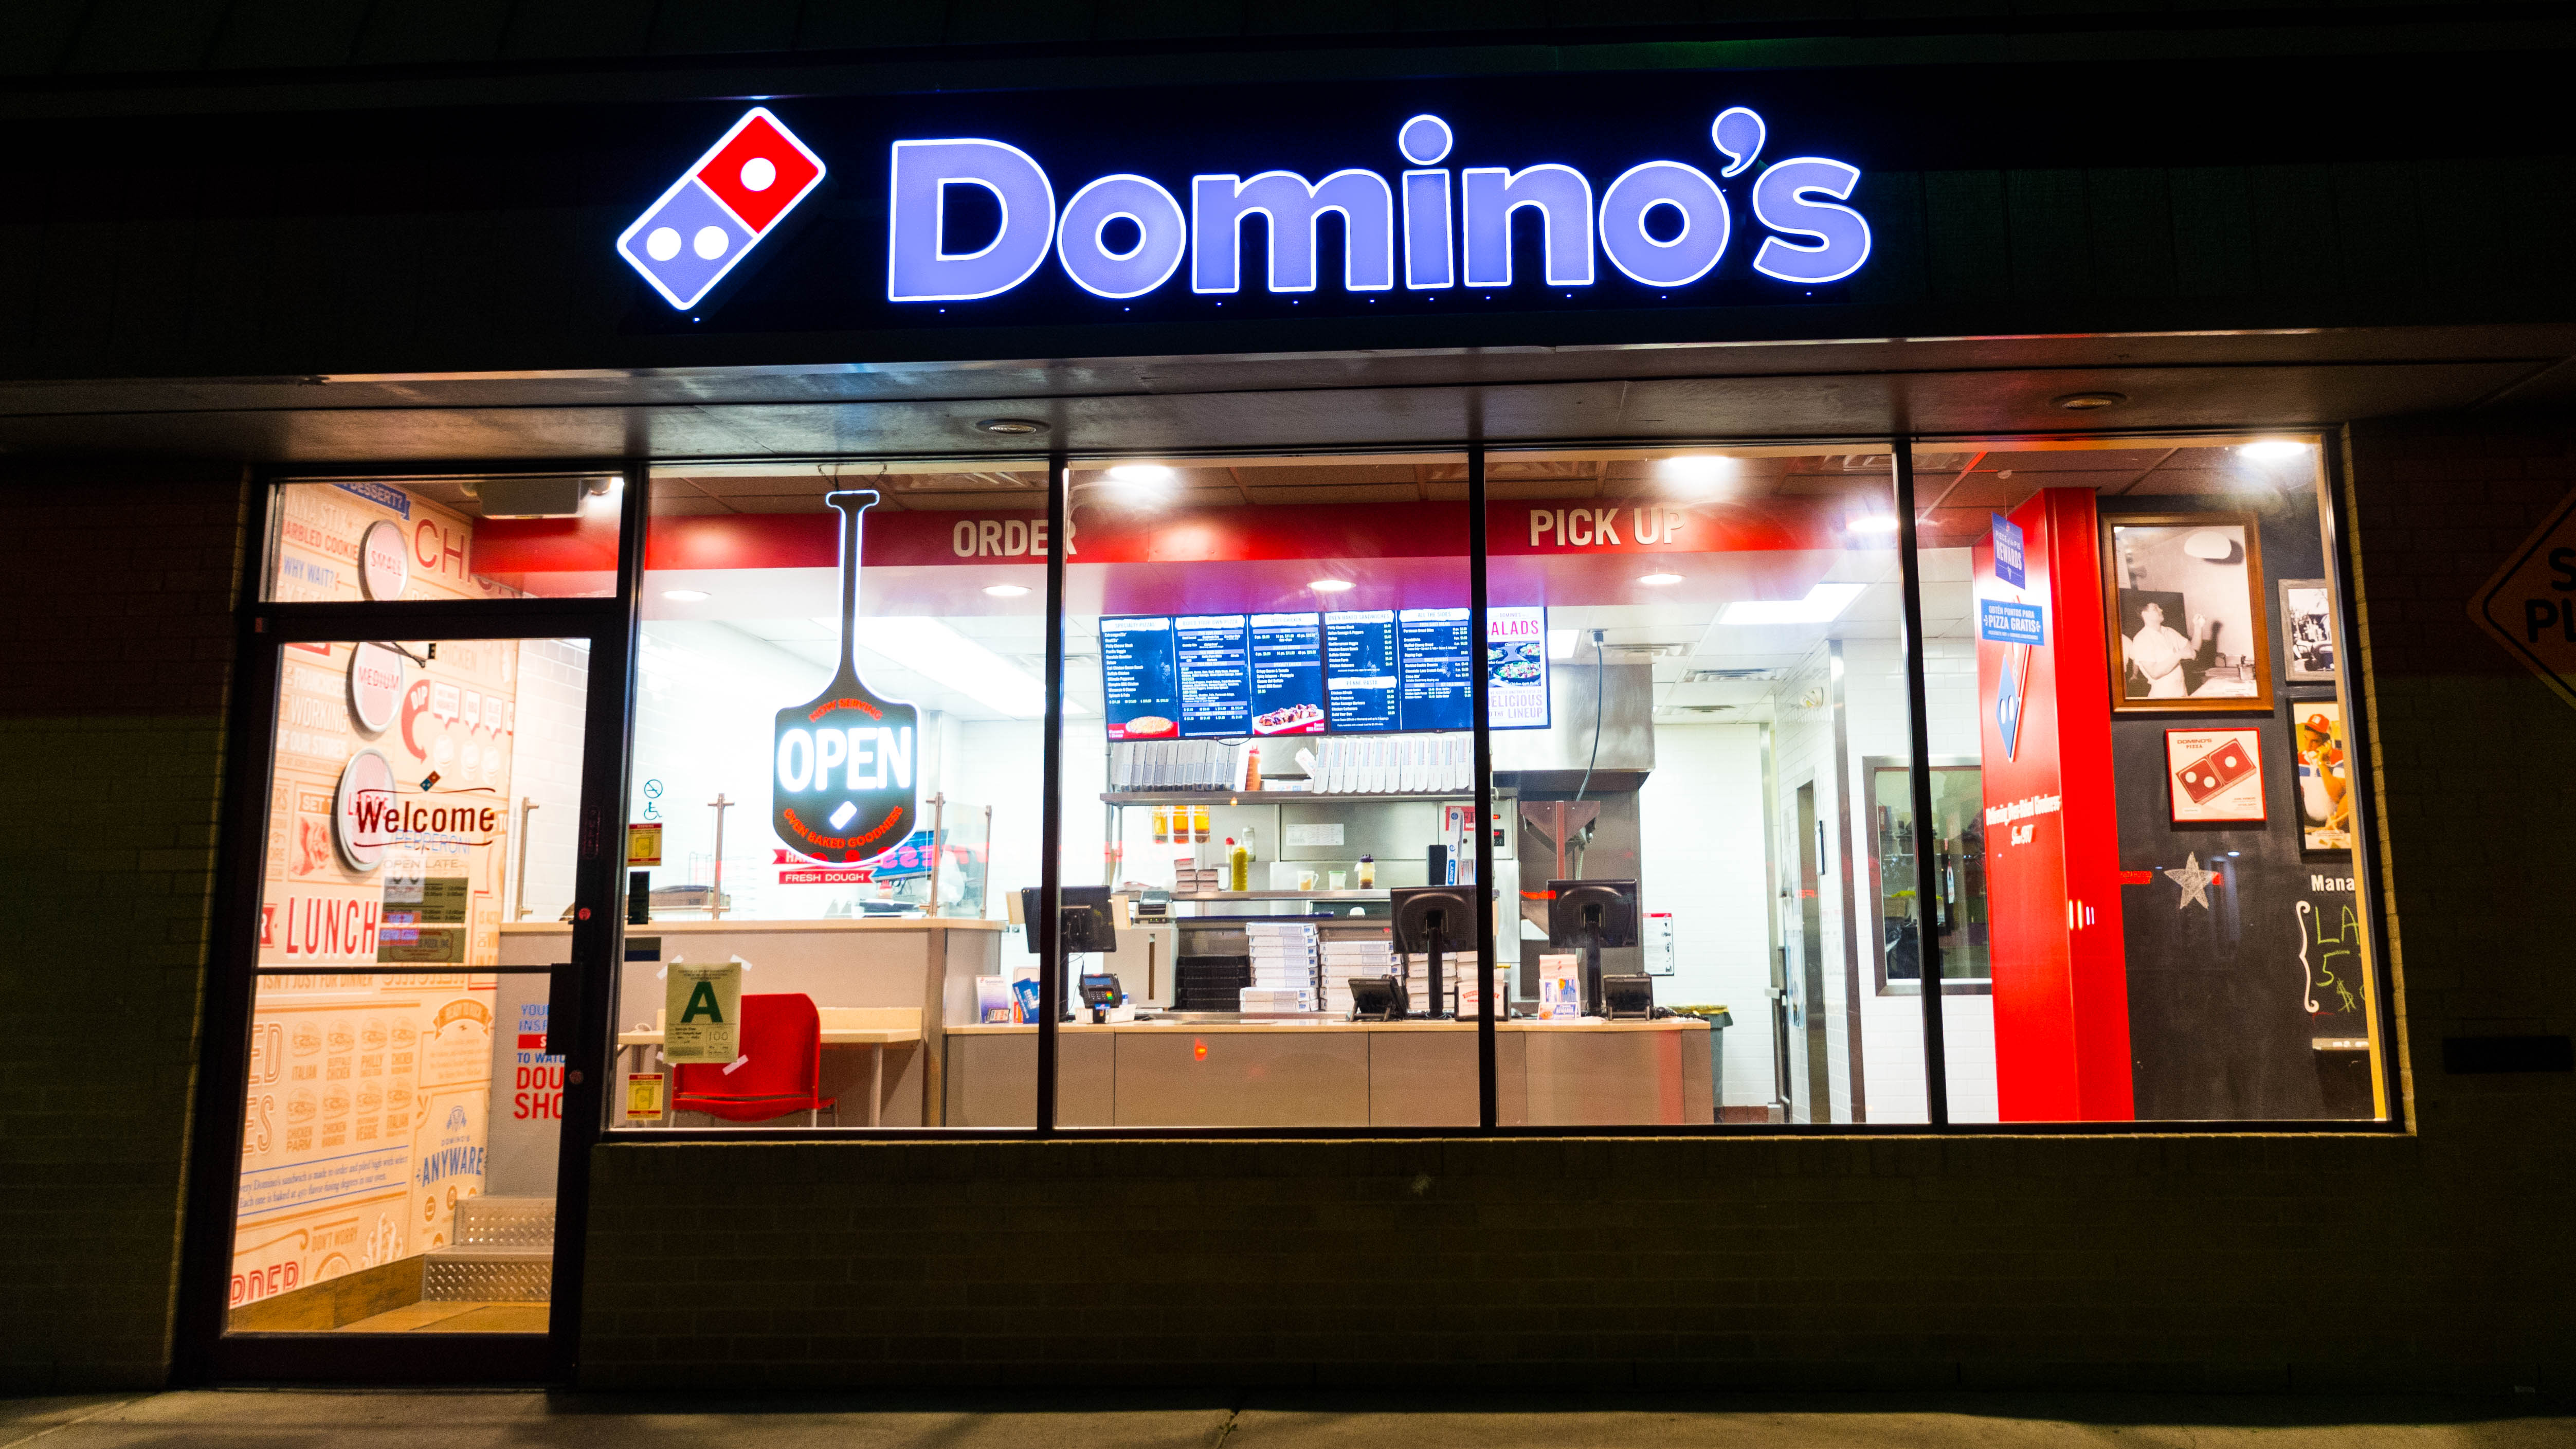 Photograph of a Domino's store